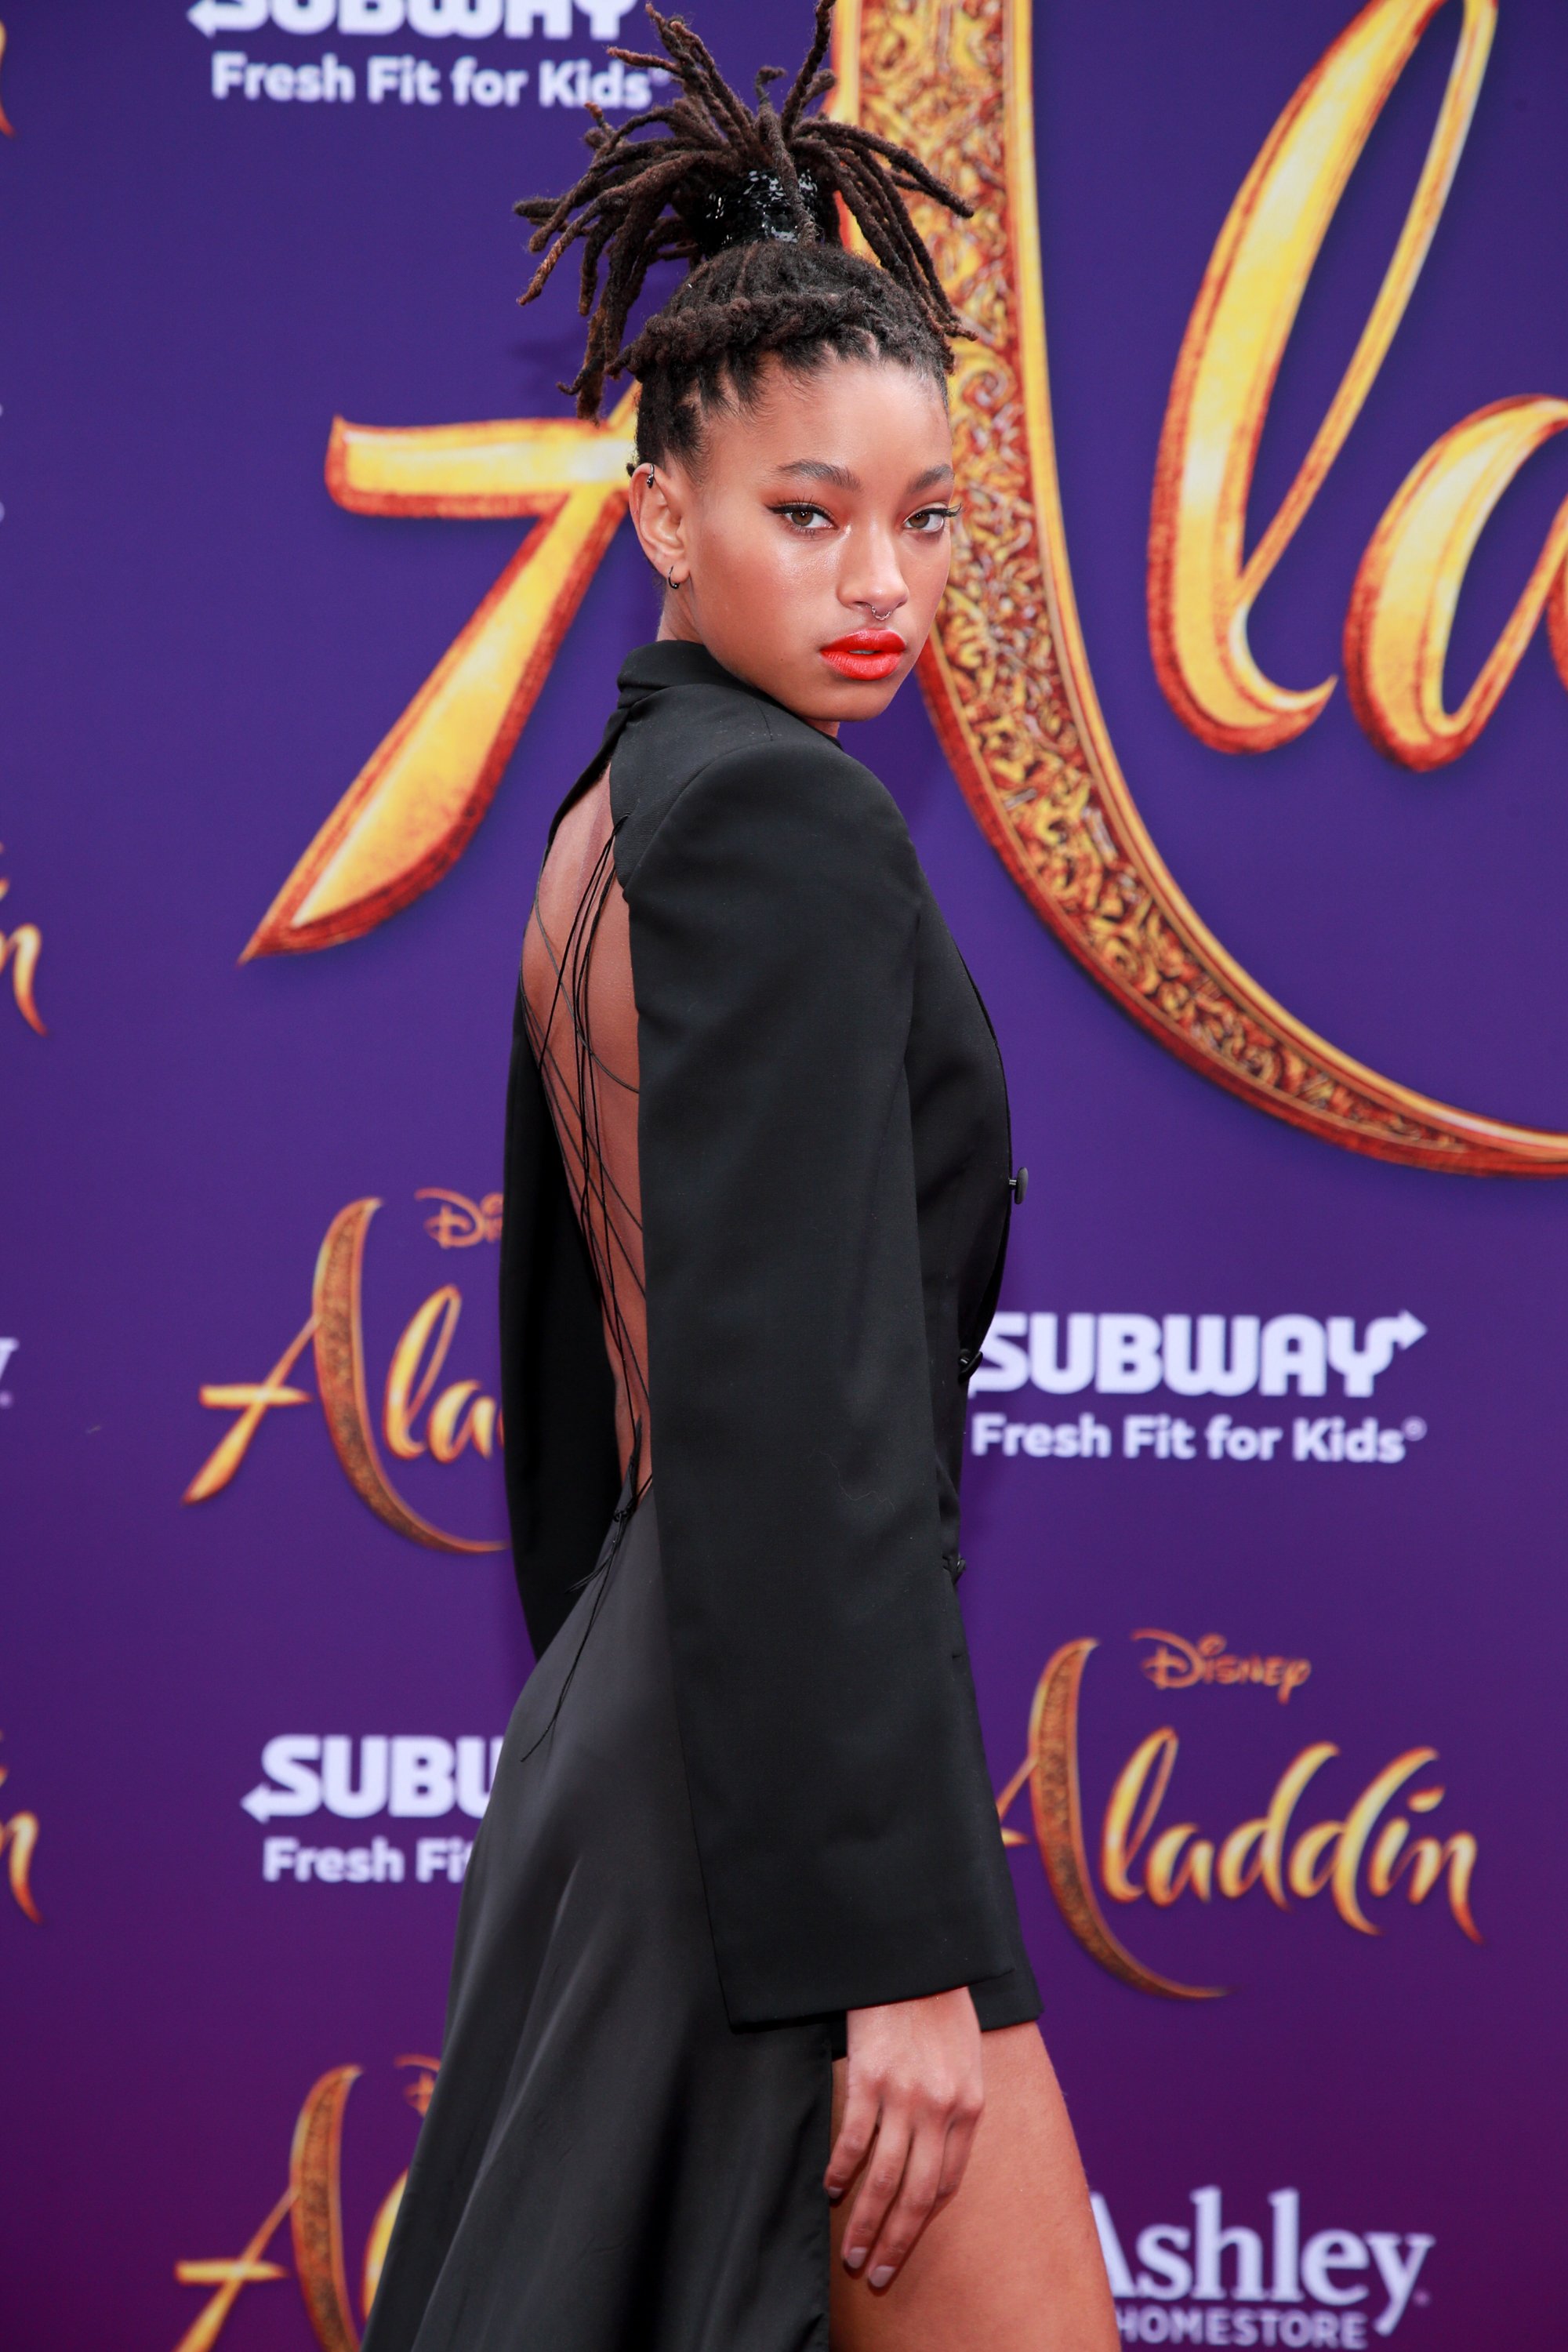 Willow Smith at the premiere of Aladdin in May 2019 | Photo: Getty Images